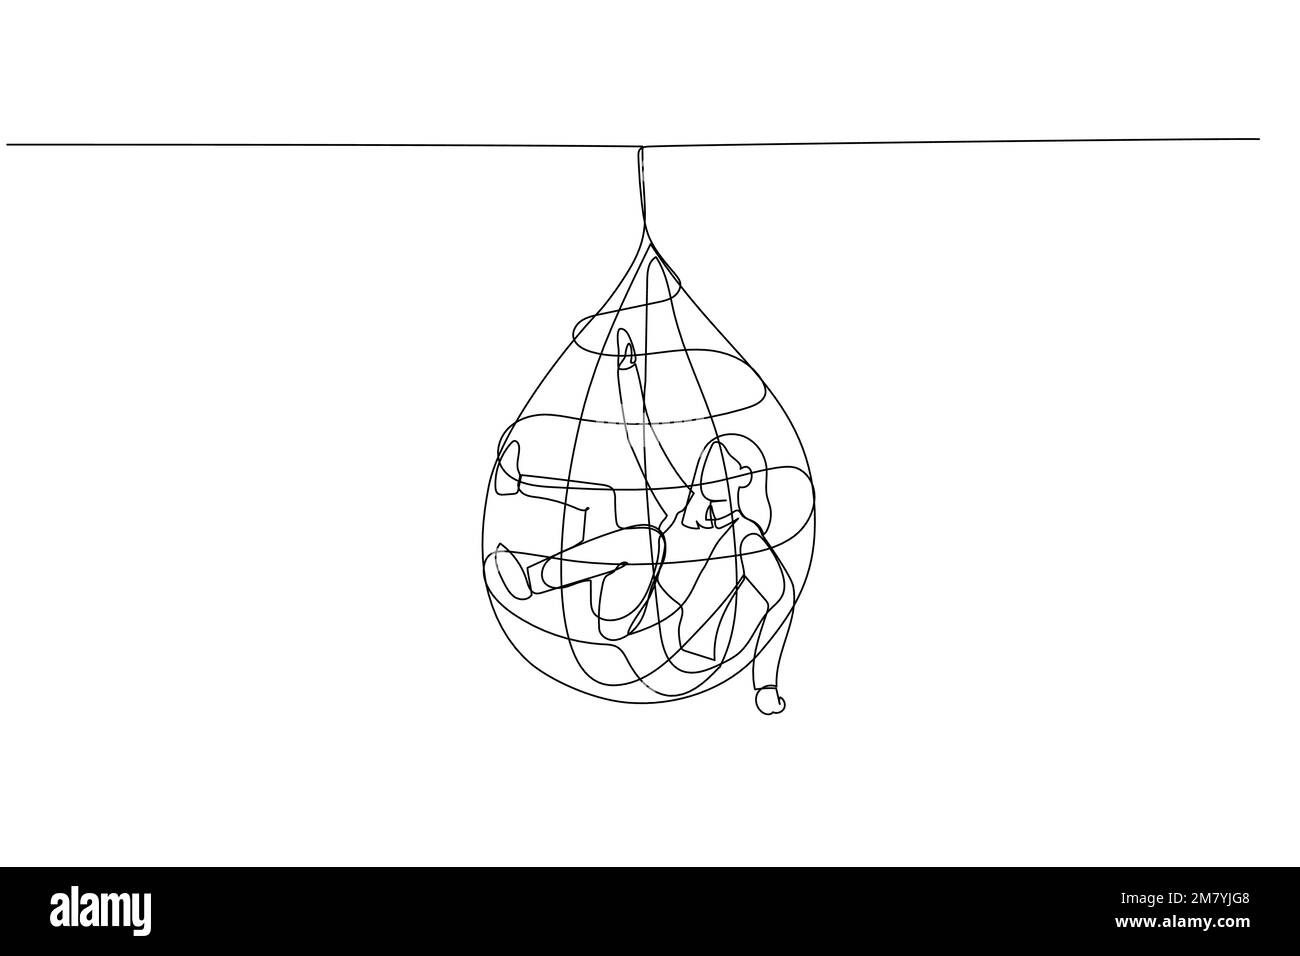 Drawing of business woman tangled in net trap metaphor of business failure get caught. One continuous line art style design Stock Vector